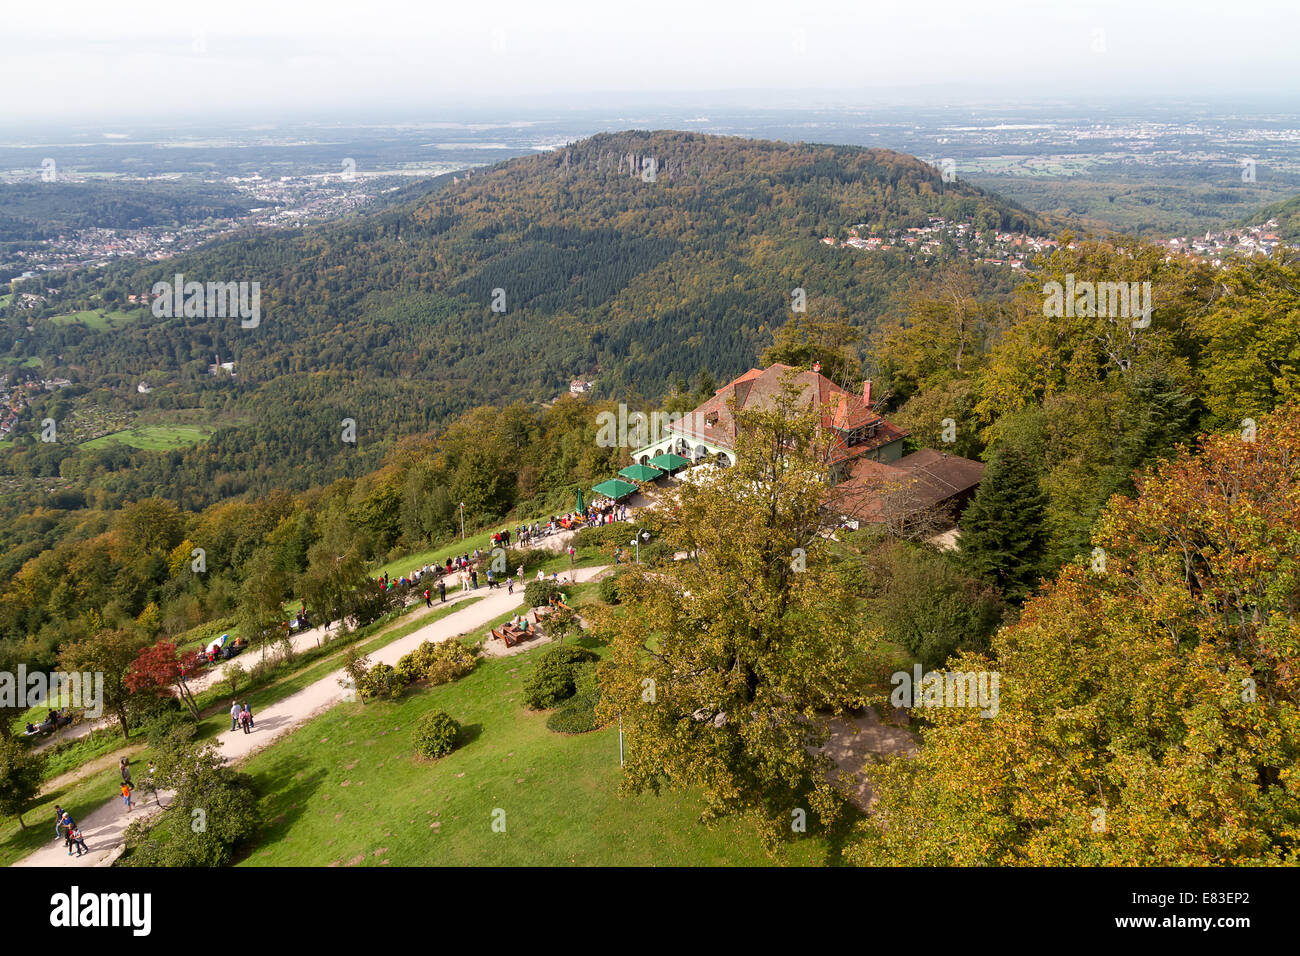 Page 2 - Baden Baden High Resolution Stock Photography and Images - Alamy